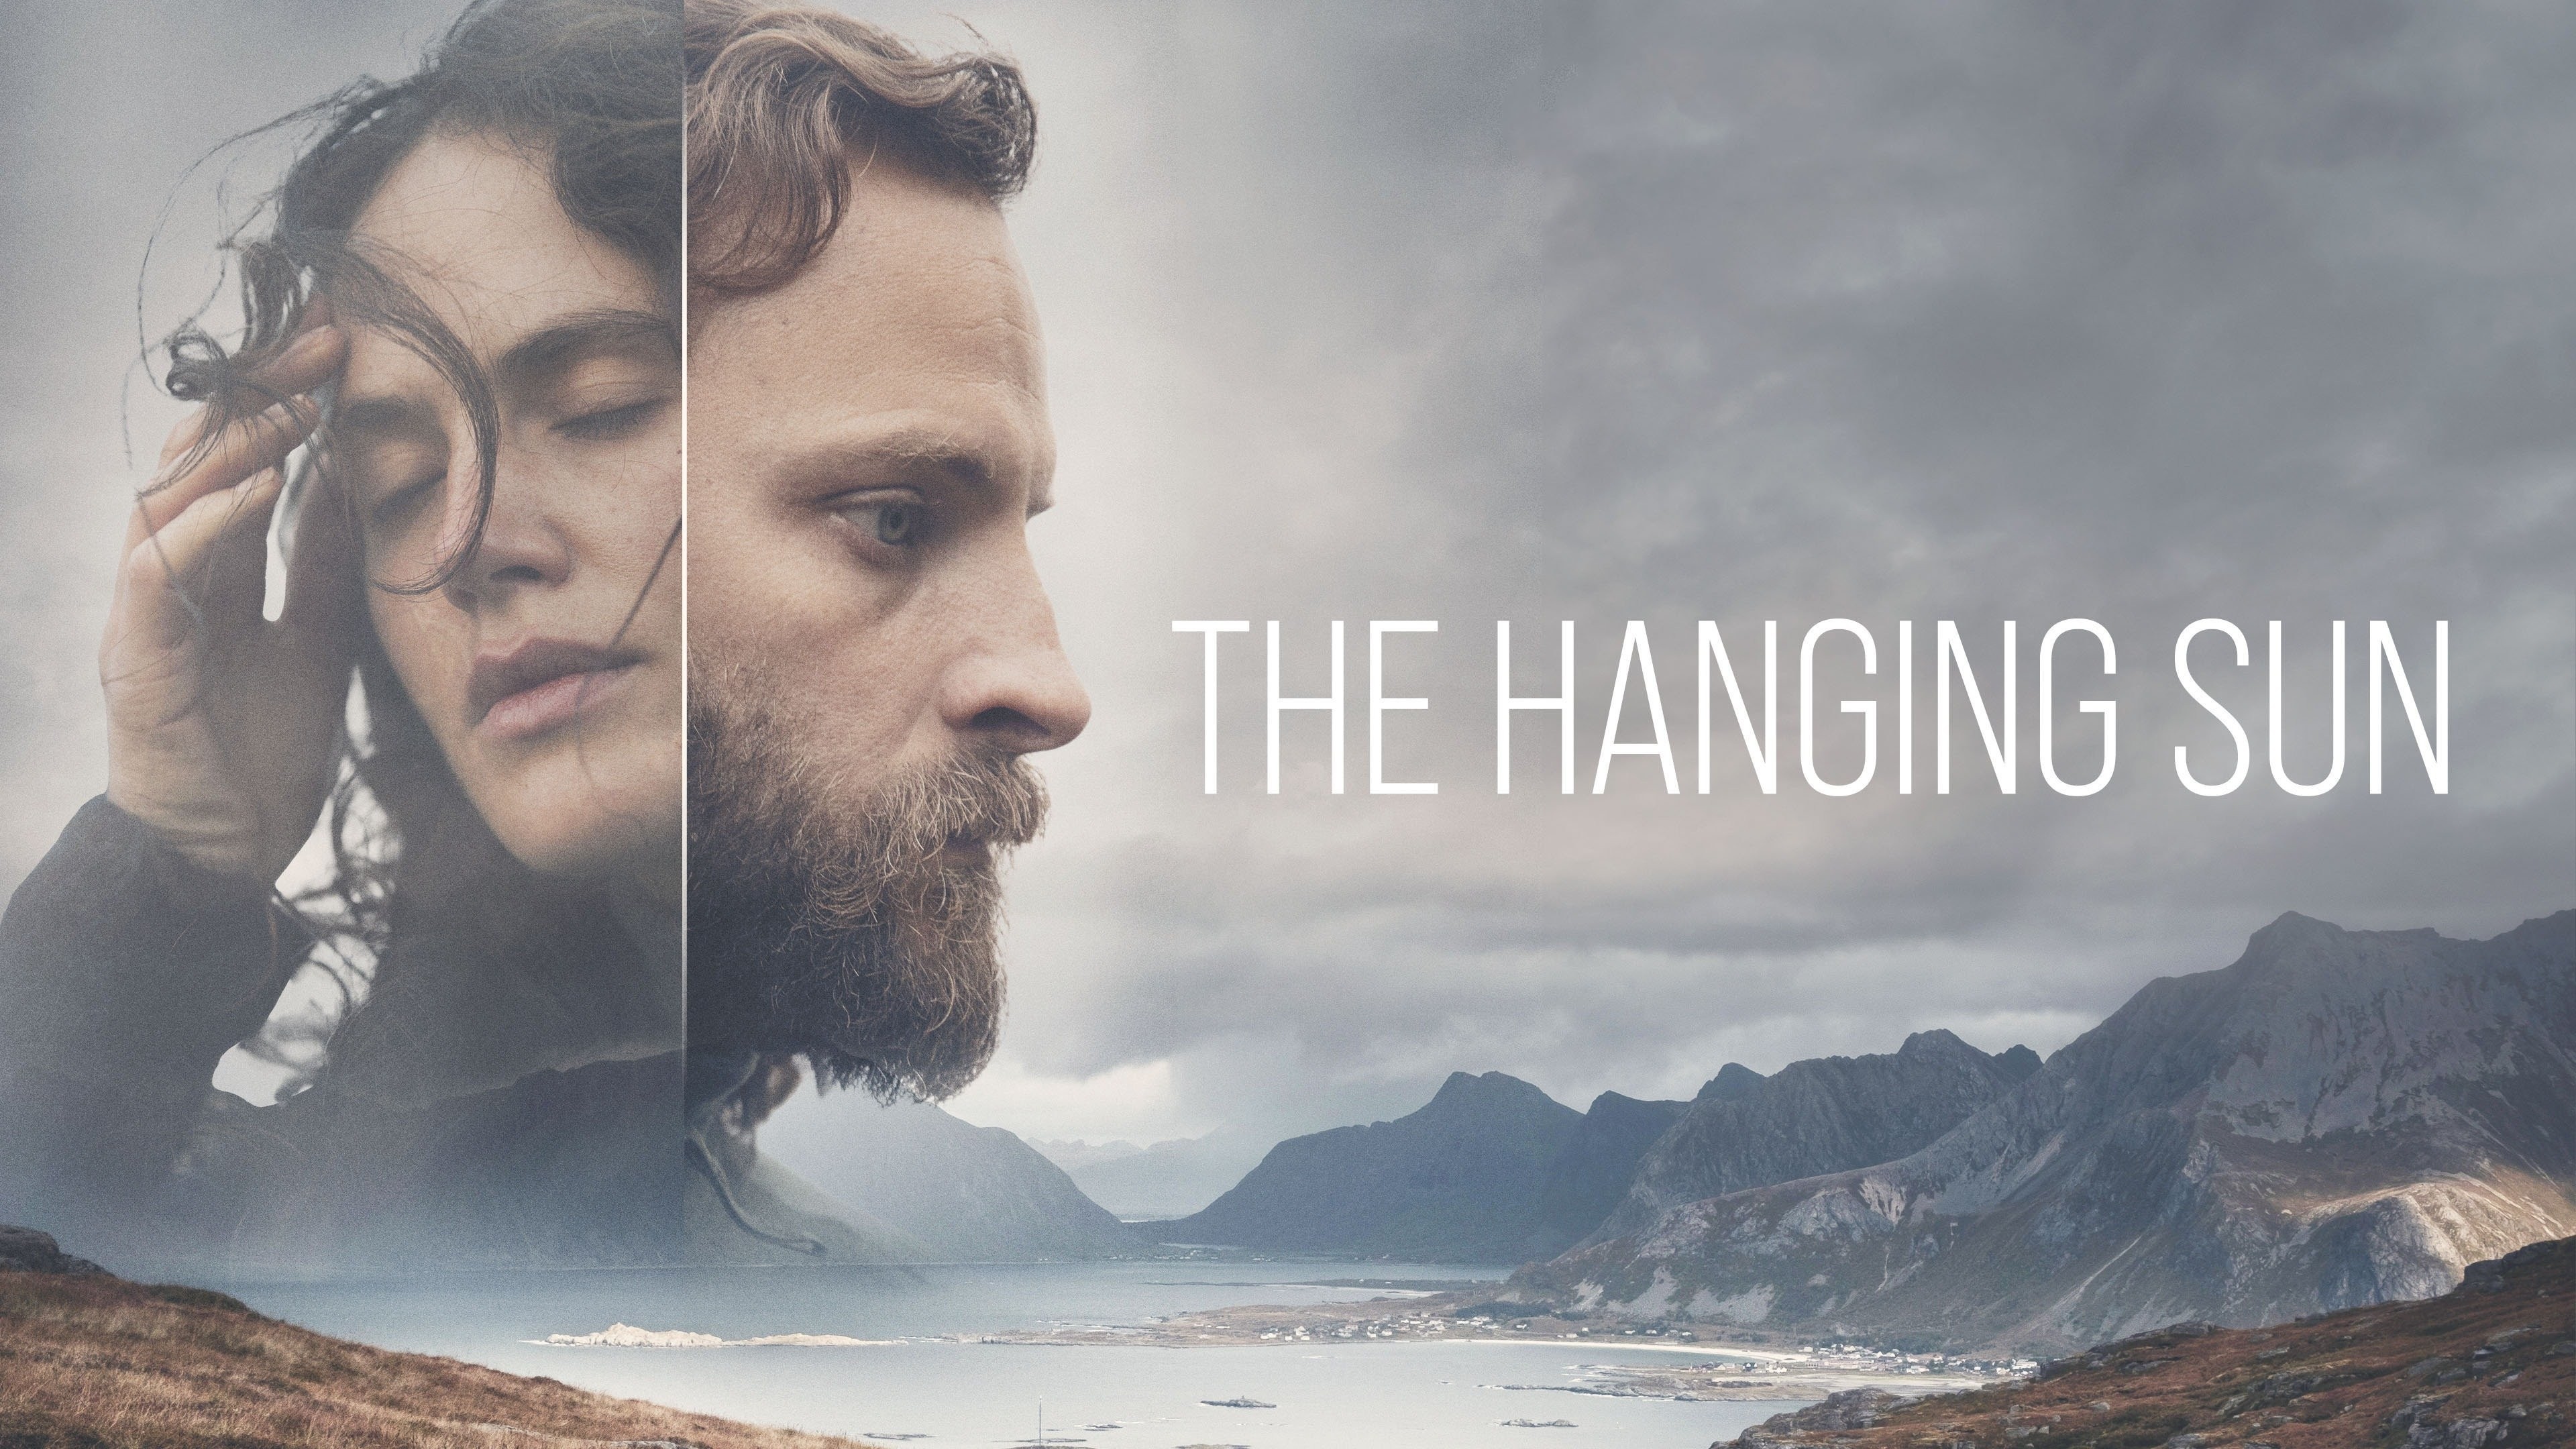 The Hanging Sun Full HD Movie Download